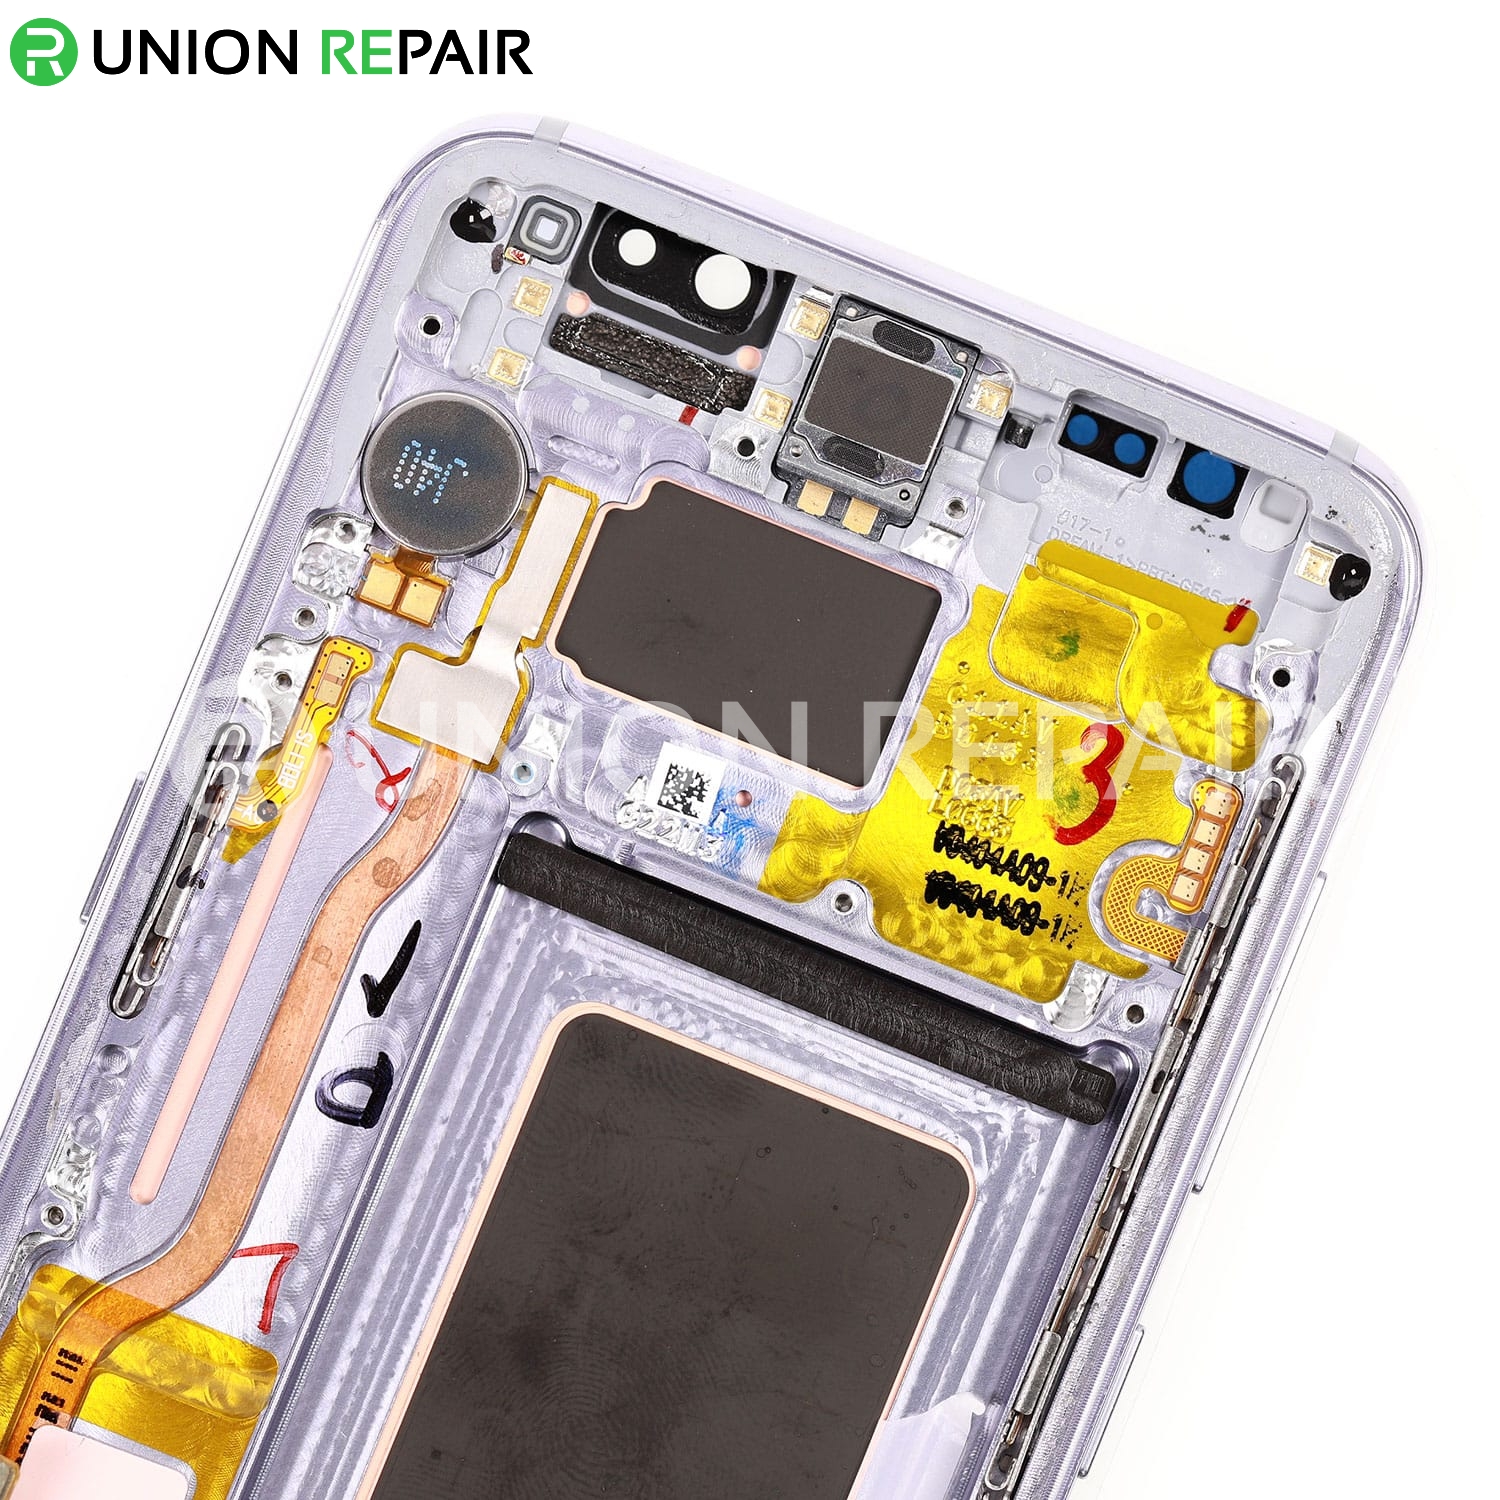 Replacement for Samsung Galaxy S8 SM-G950 LCD Screen Assembly with Frame - Silver